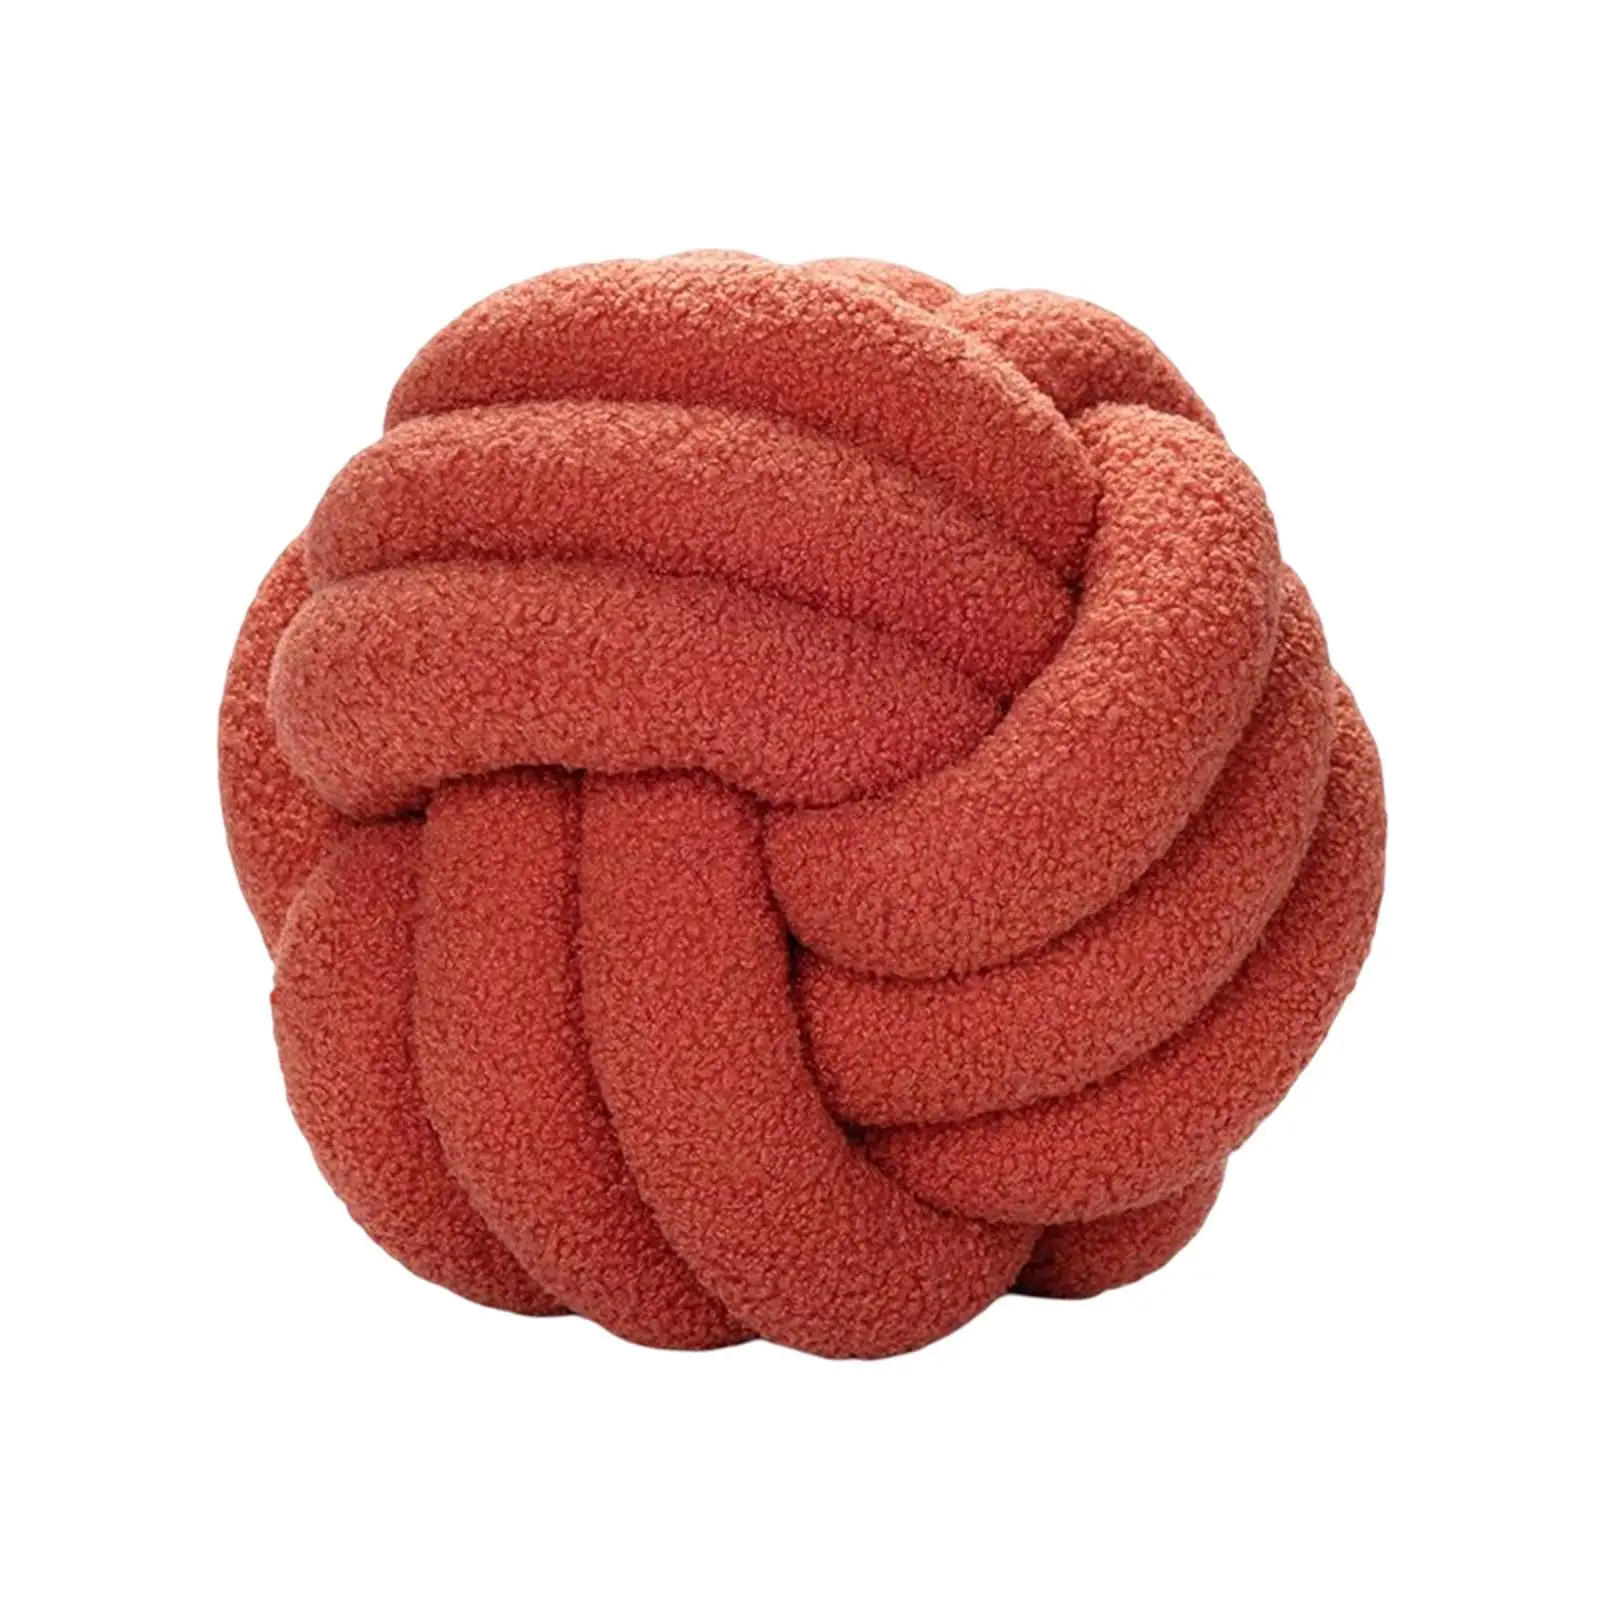 Plush Knot Ball Pillow 8.6inch Home Decoration Modern Photo Props for Office Decor